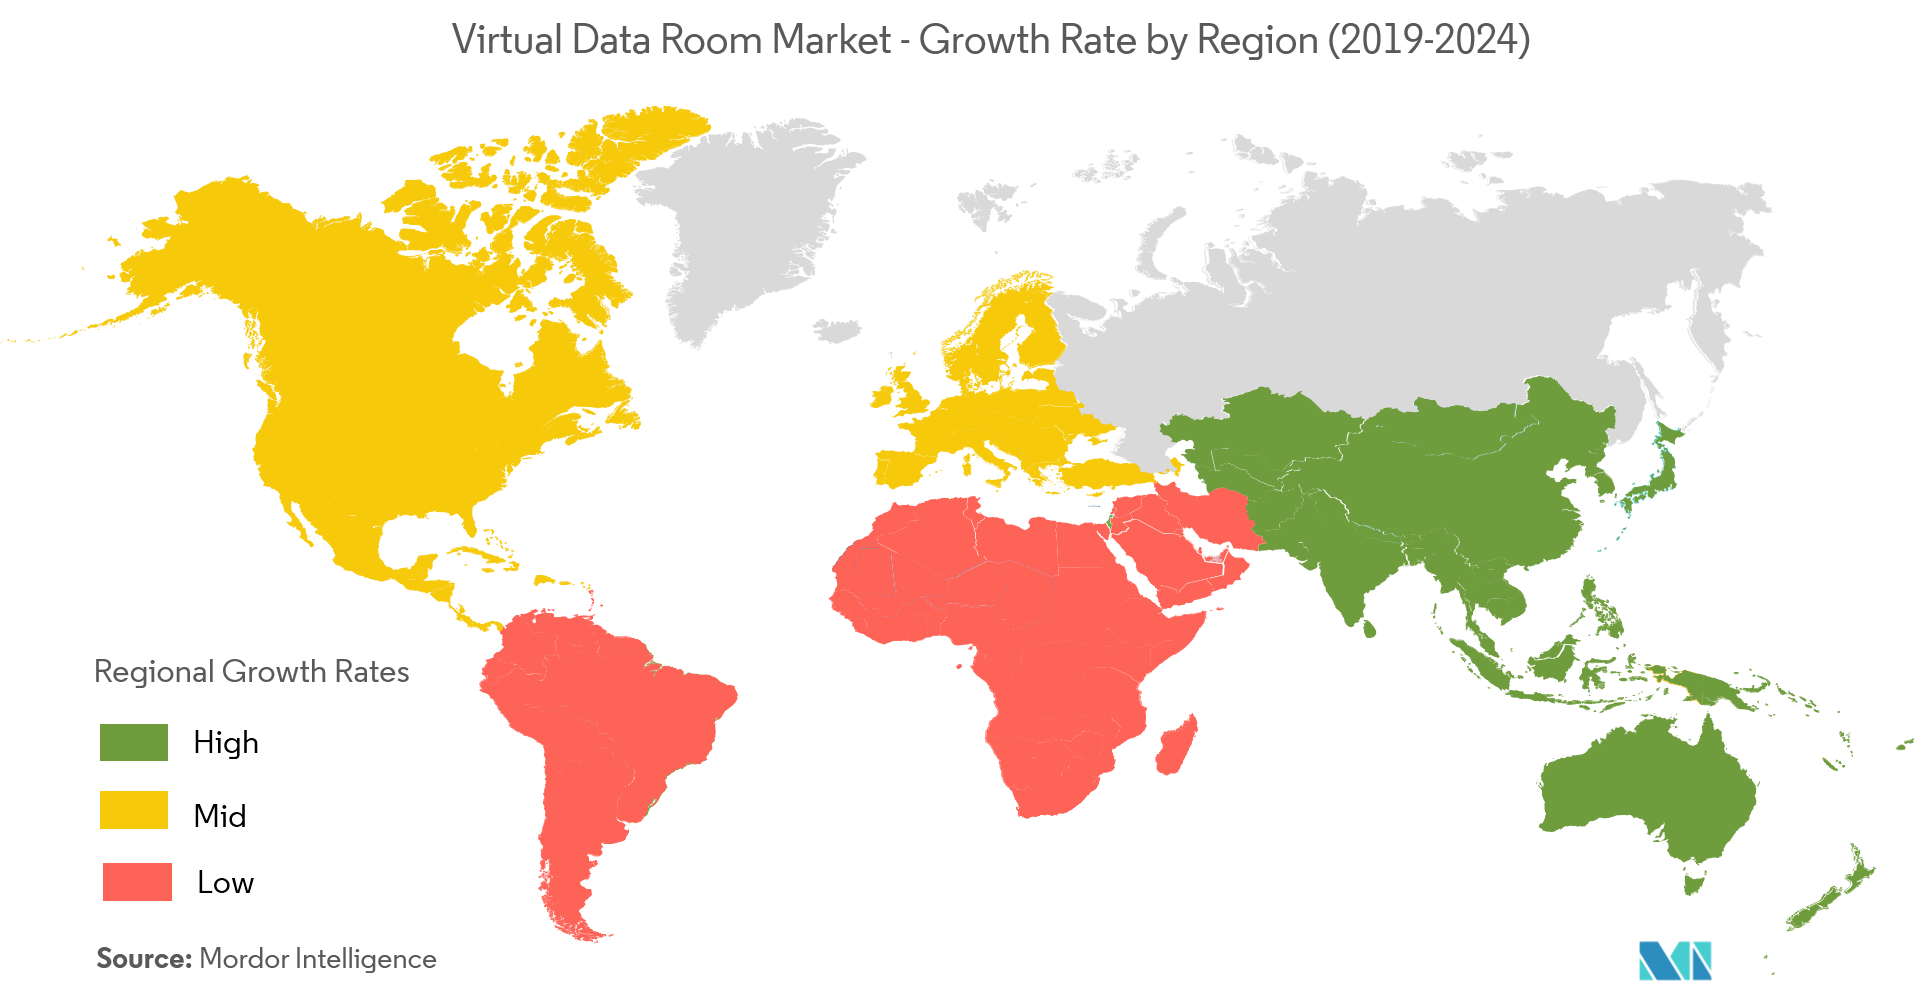 Virtual Data Room Market - Growth Rate by Region (2019 - 2024)